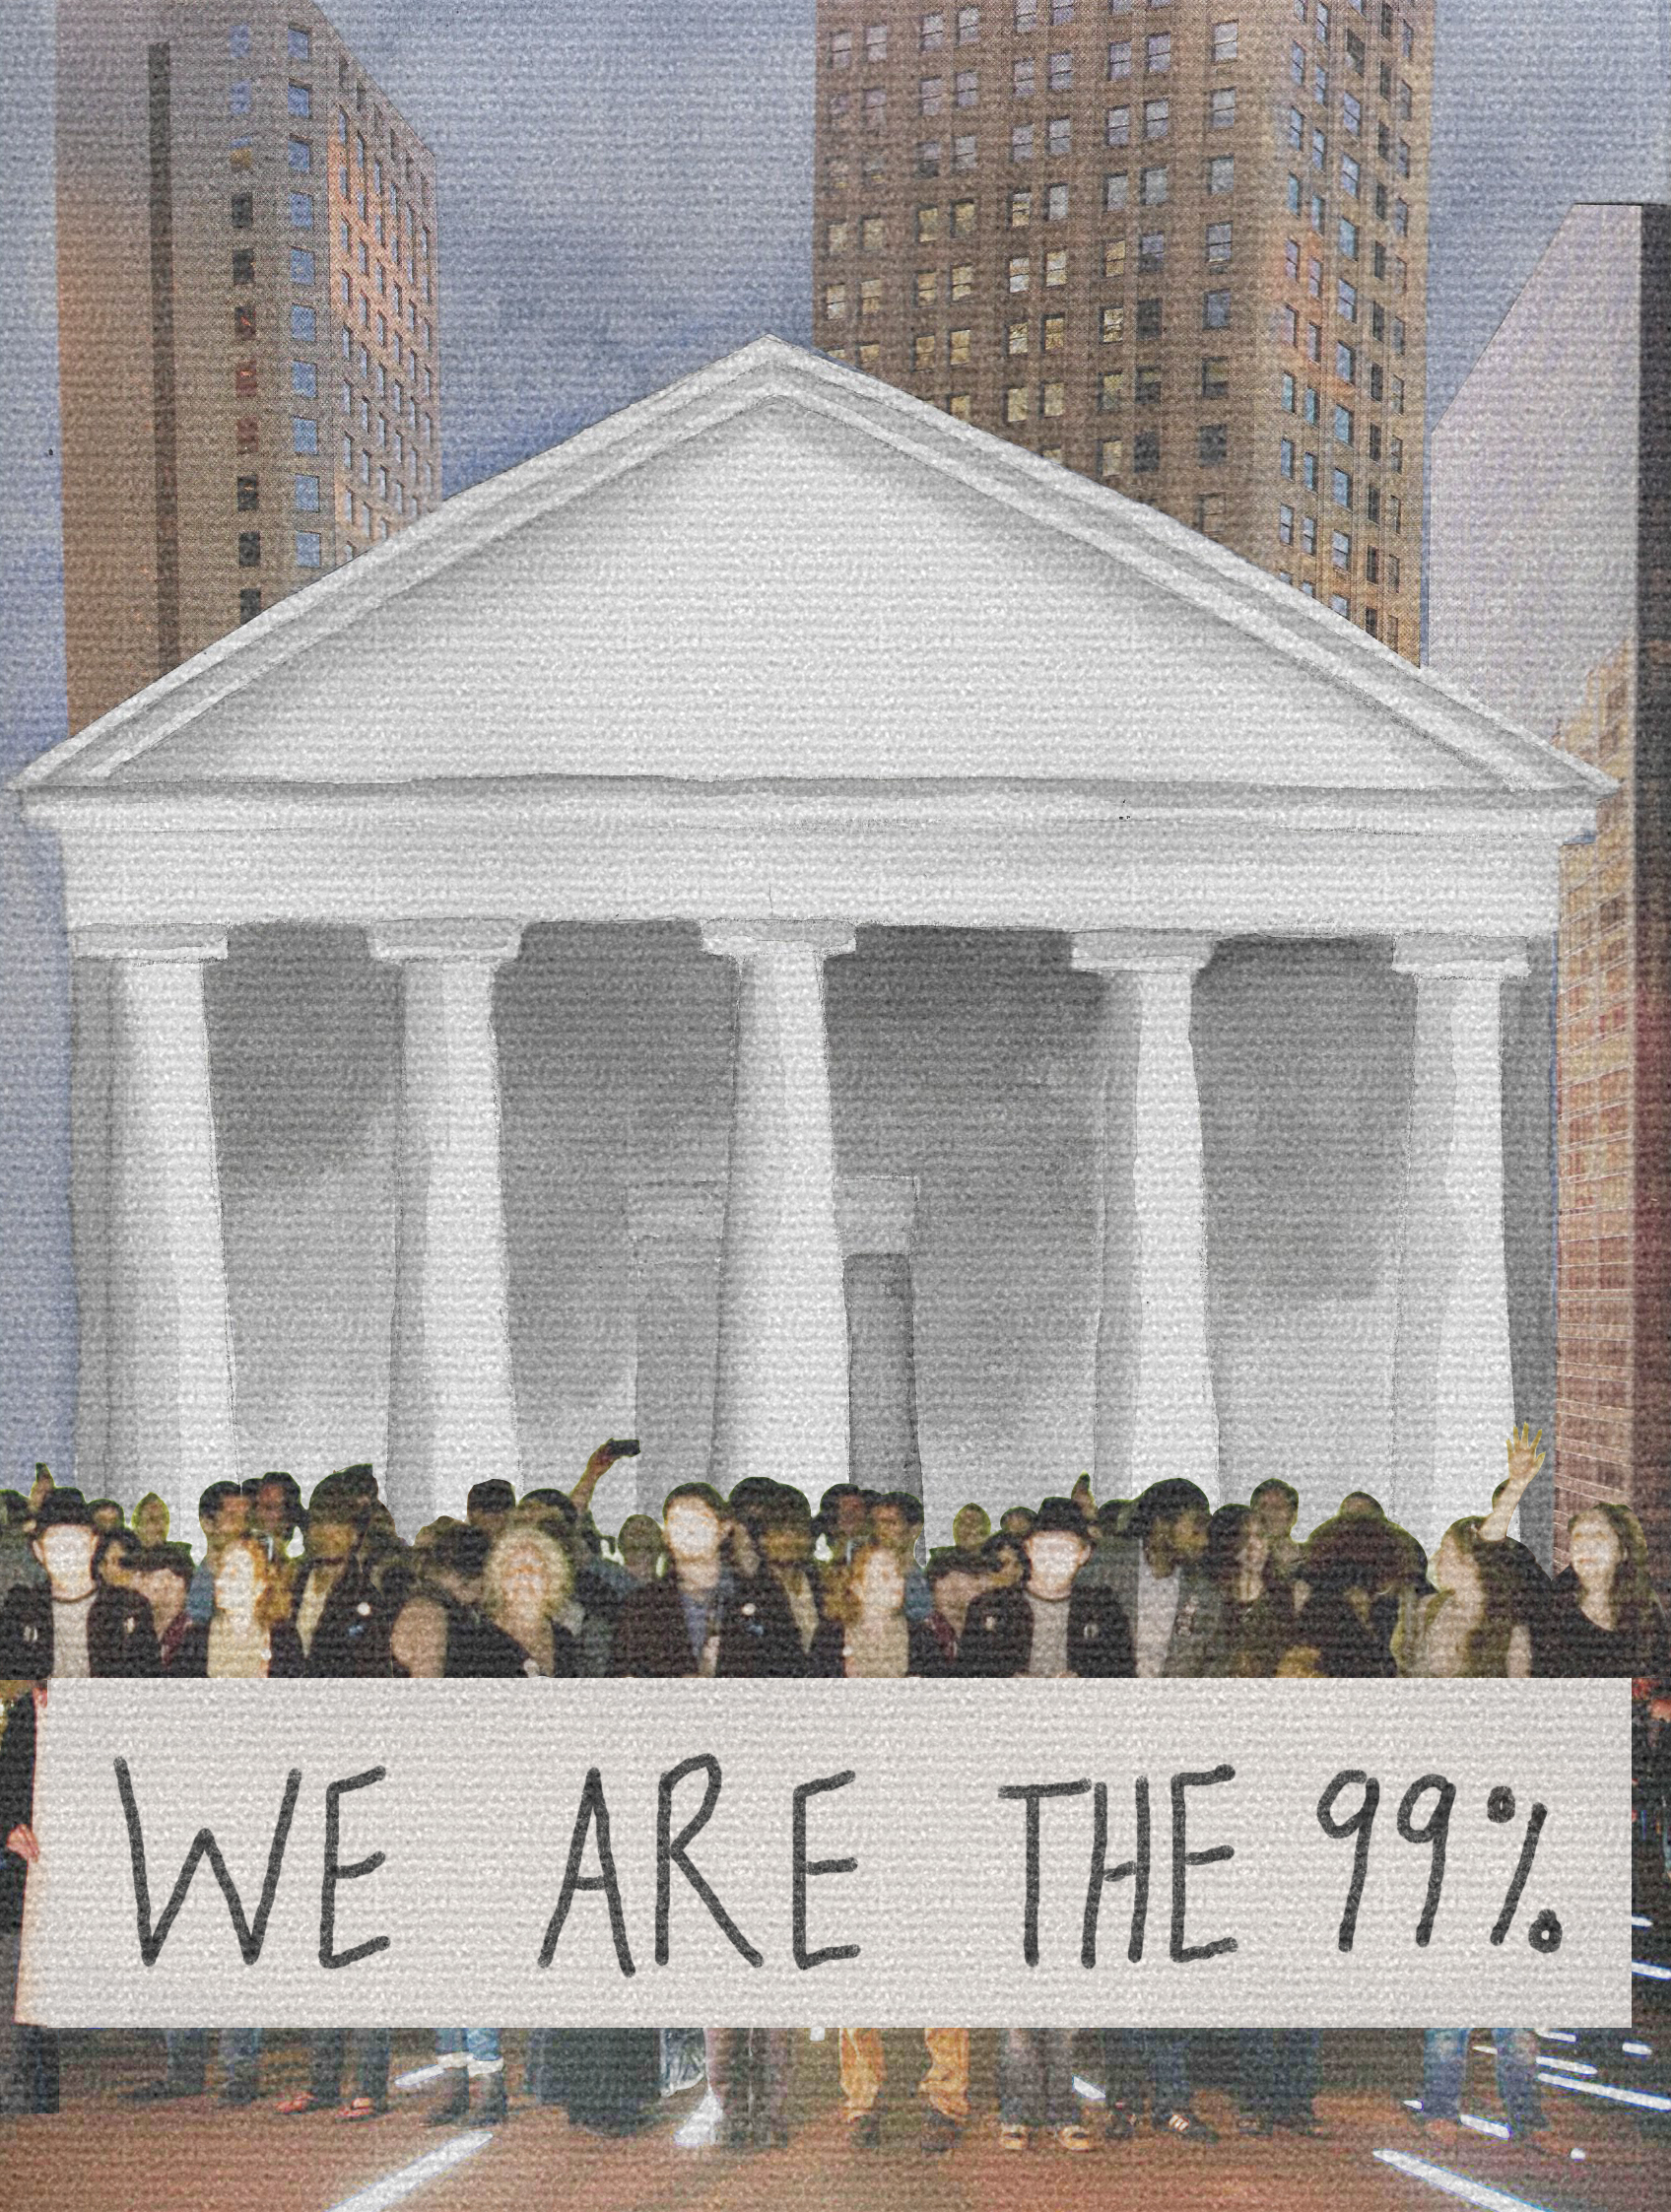 Illustration of crowd in front of Supreme Court building with banner reading "WE ARE THE 99%".